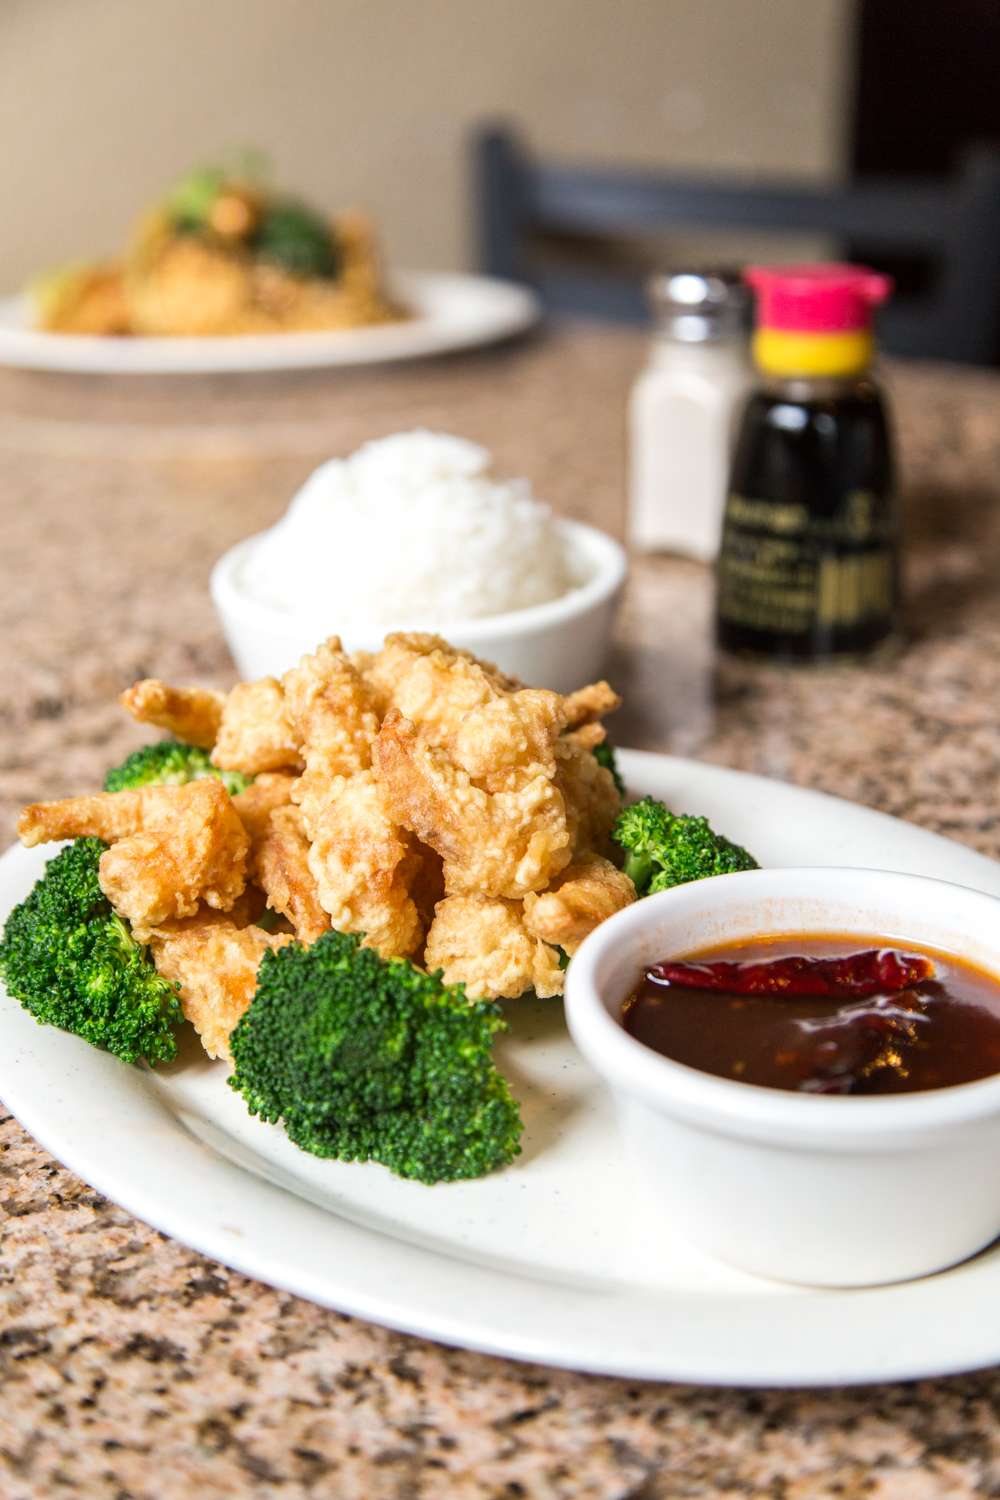 Heights Asian Cafe | 2201 Yale St, Houston, TX 77008 | Phone: (713) 880-9998